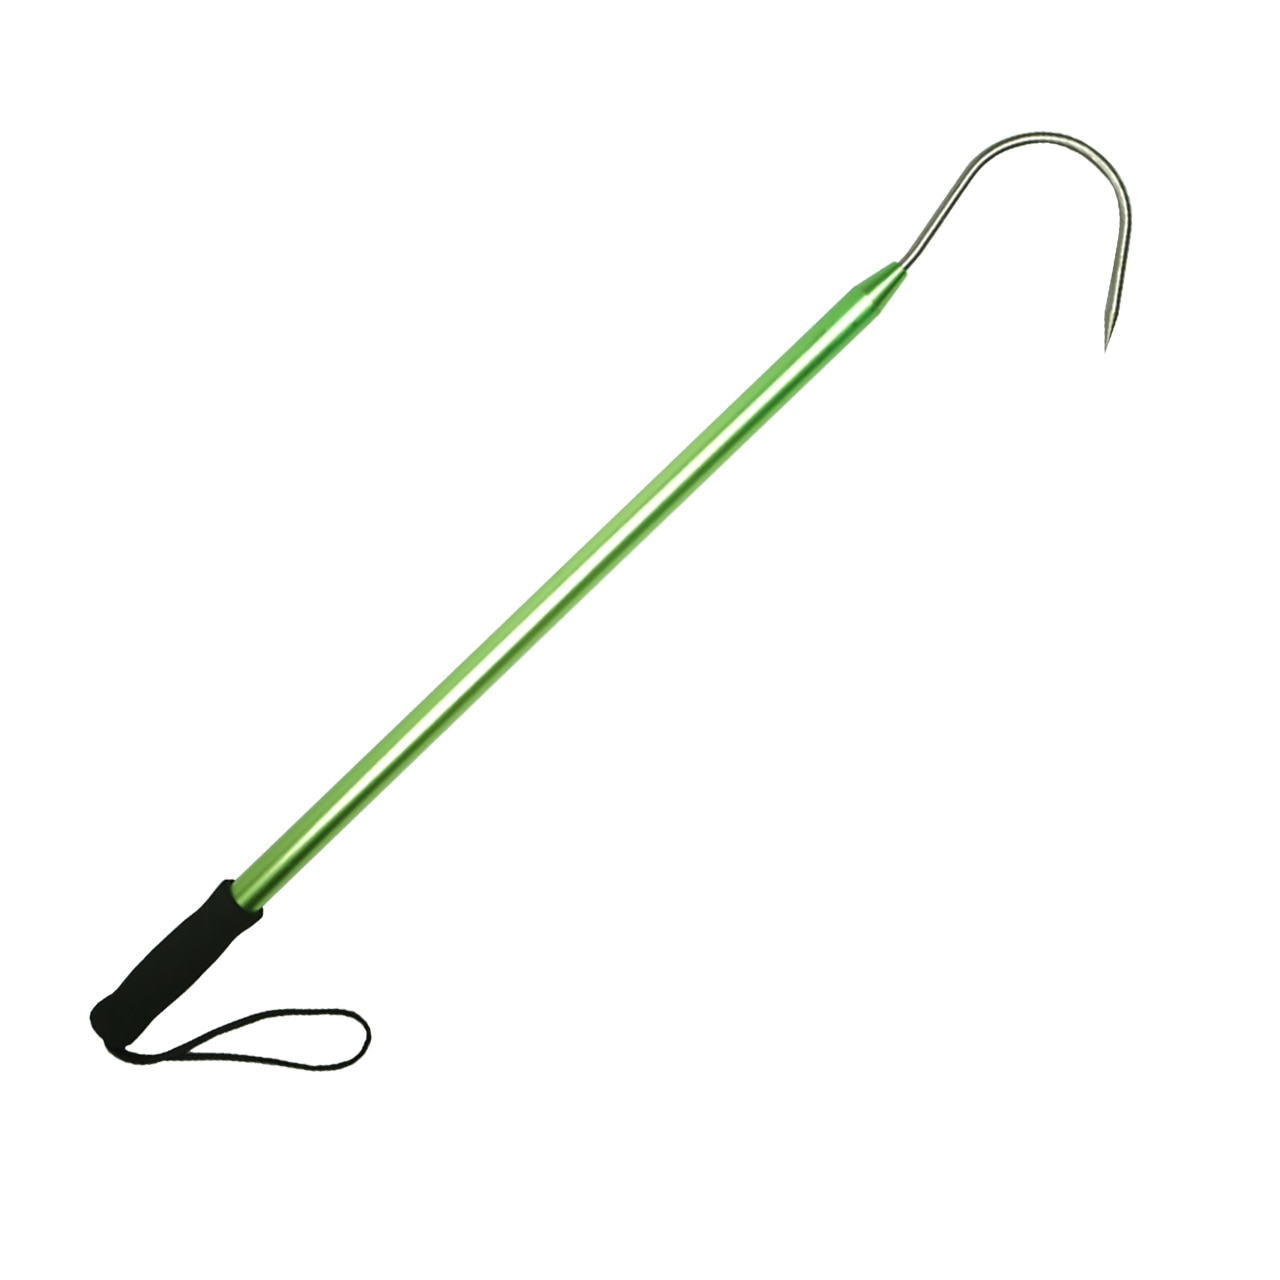 Top Quality Bowfishing Equipment for Sale - Bowtreader